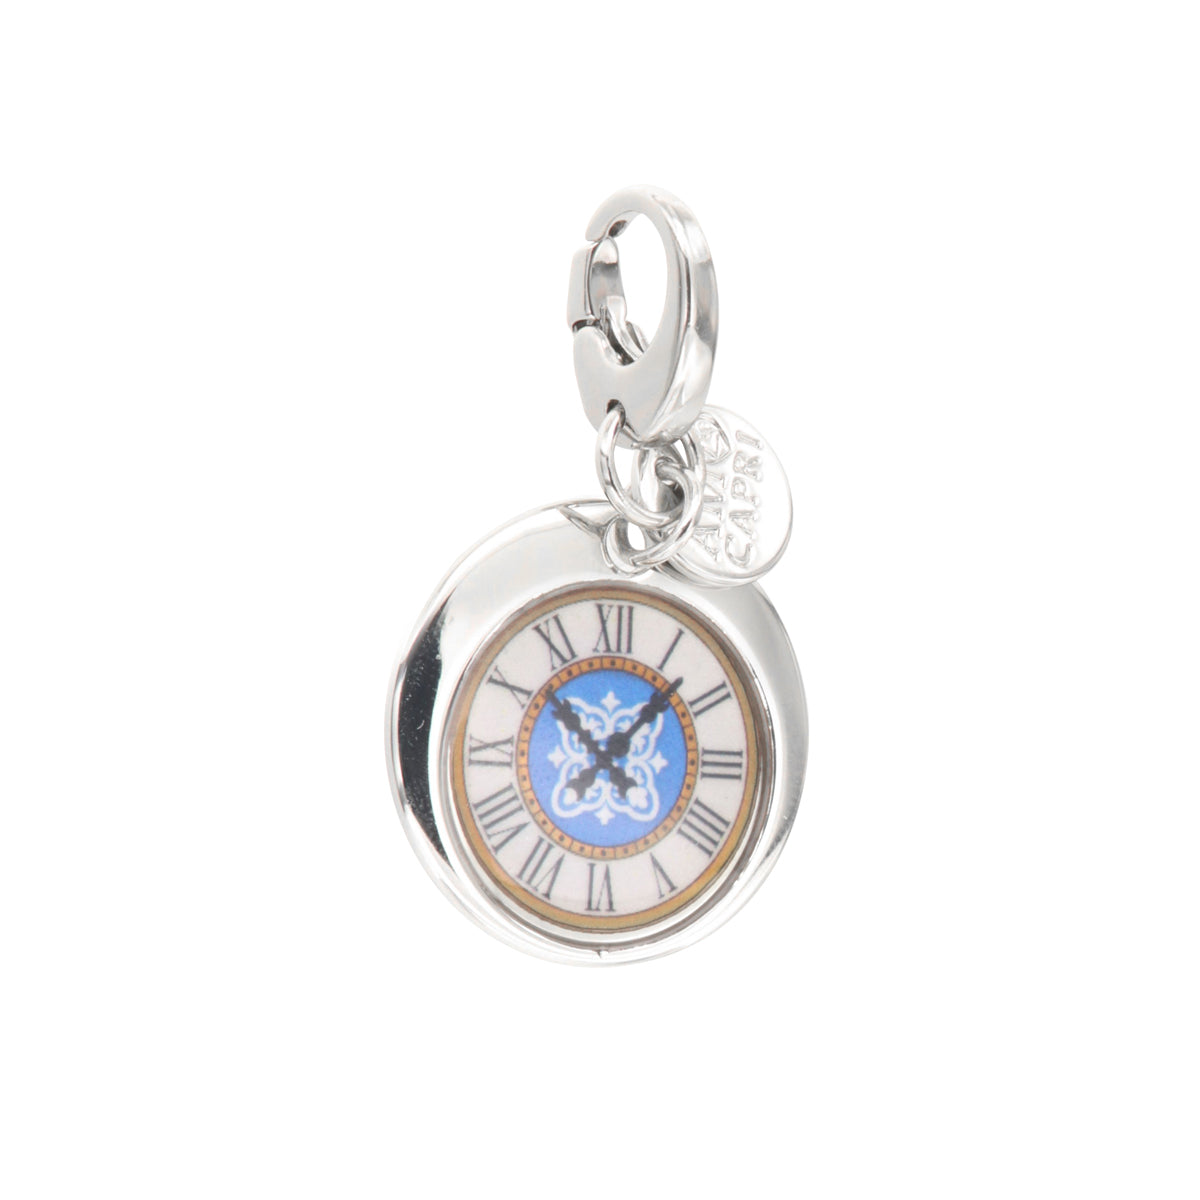 Metal pendant in medallion with Capri watch symbol with colored glazes